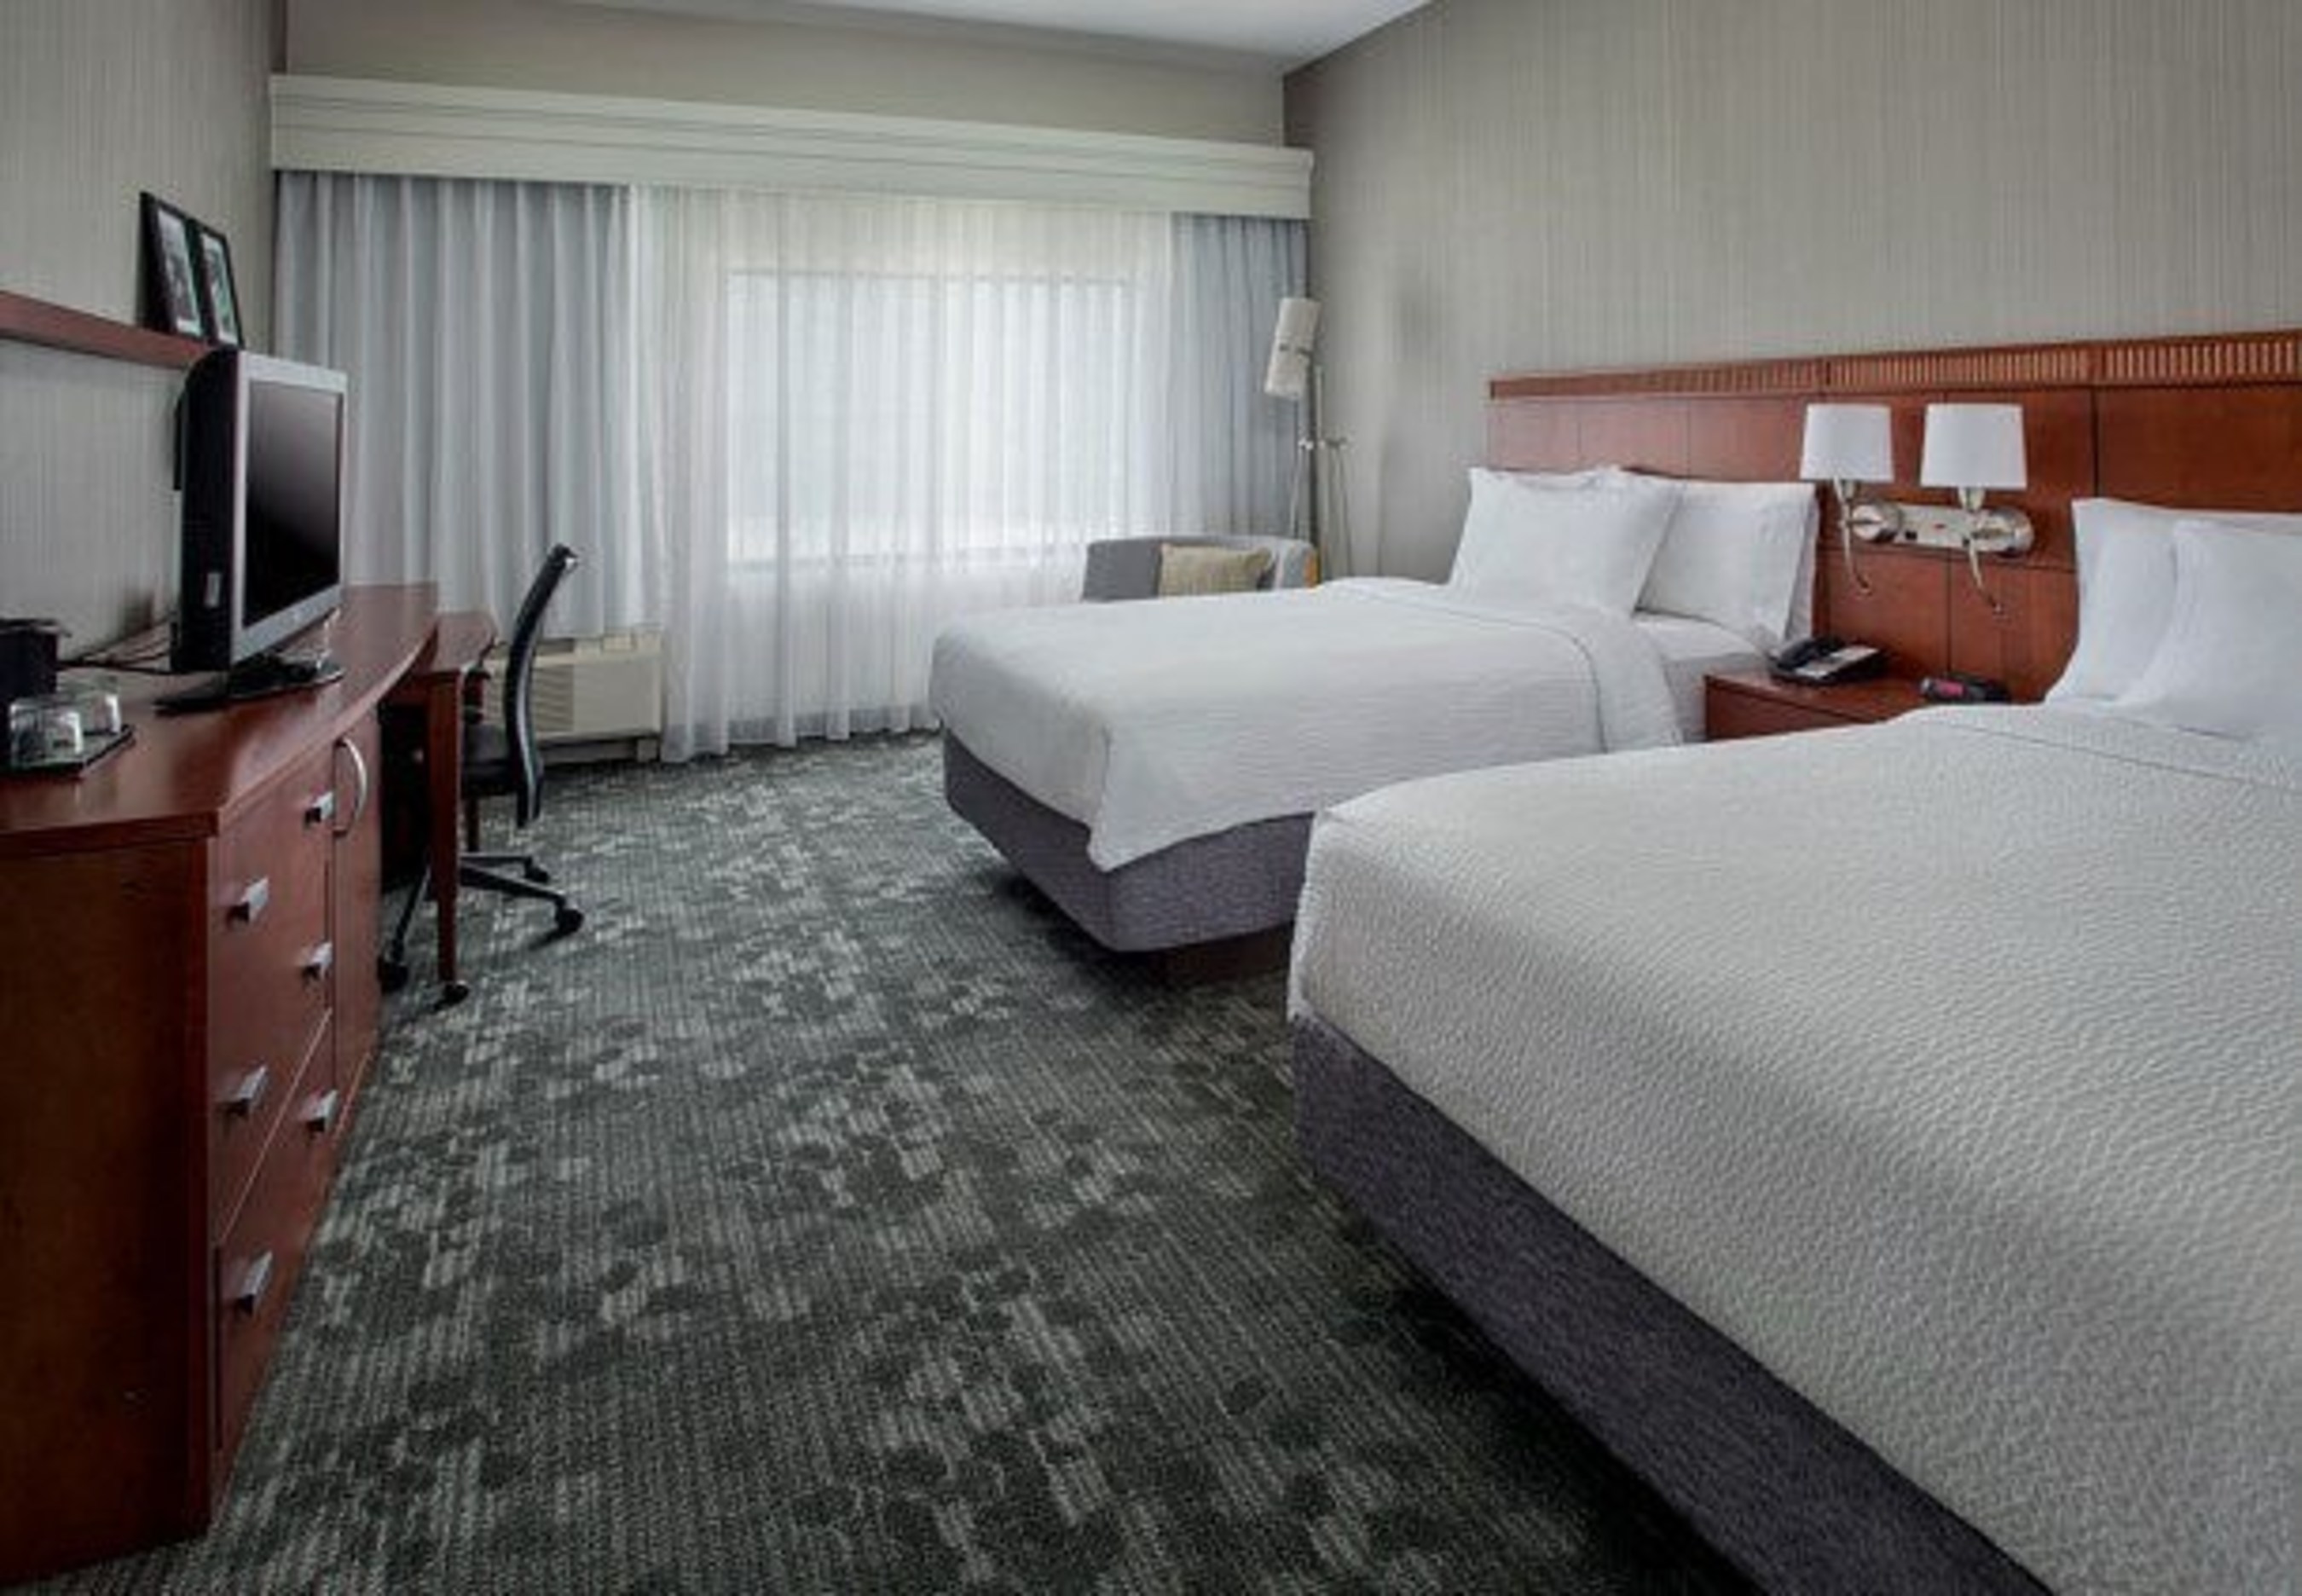 Courtyard Philadelphia Plymouth Meeting invites sports teams booking 10 or more rooms to enjoy discounted room rates, one free coach's room and double Marriott Rewards points. For information, visit www.CourtyardPlymouthMeetingSports.com or call 1-610-238-0695.